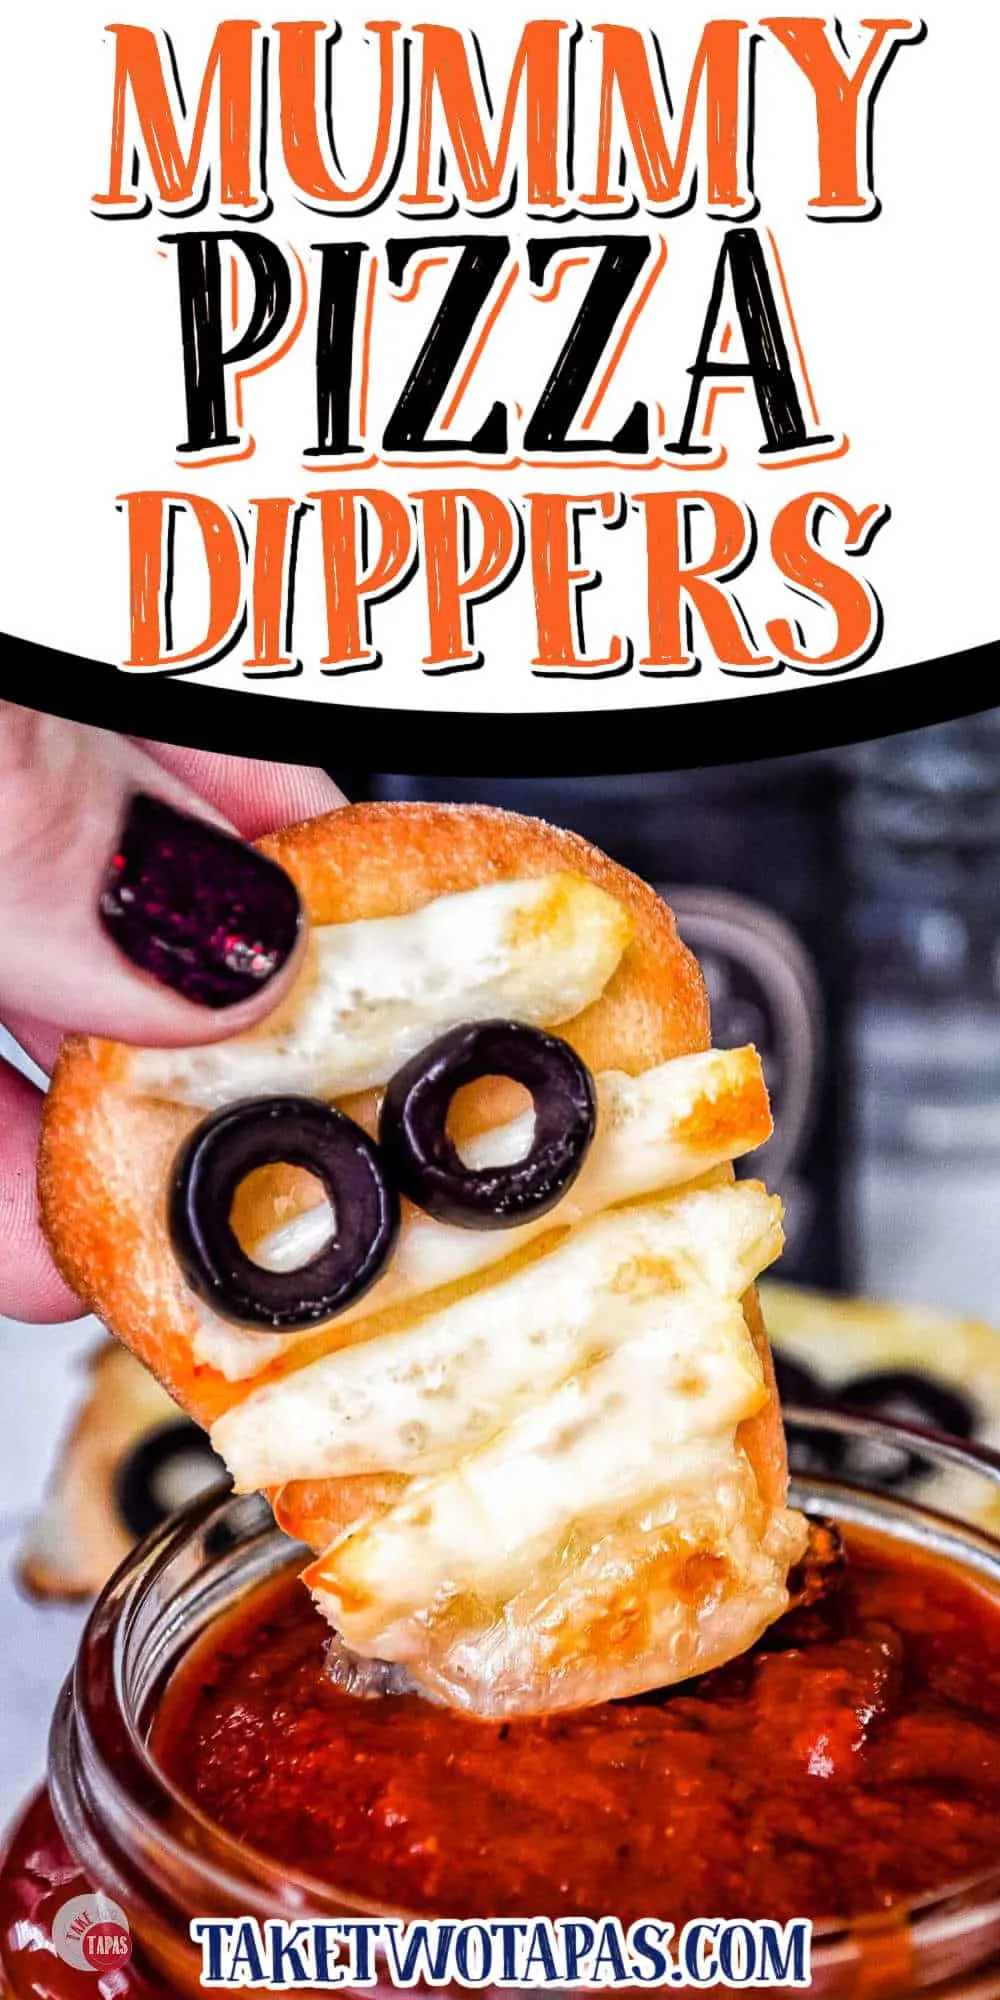 mummy pizza dipper with text "how to make mummy pizza dippers"